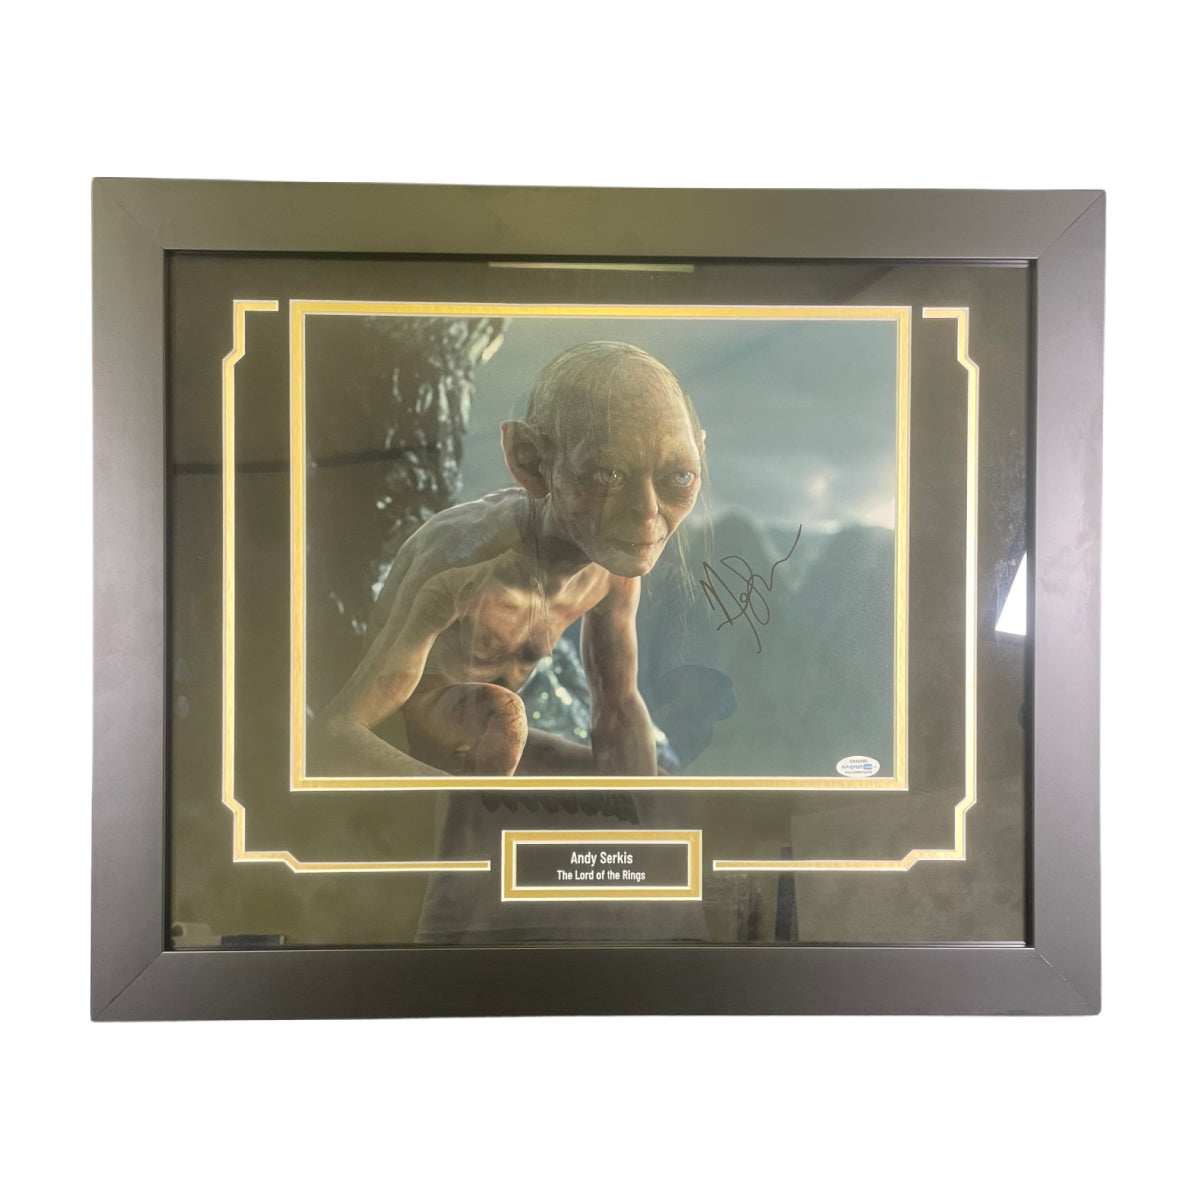 Andy Serkis Signed 11x14 Photo Framed The Lord of the Rings Gollum Autographed ACOA